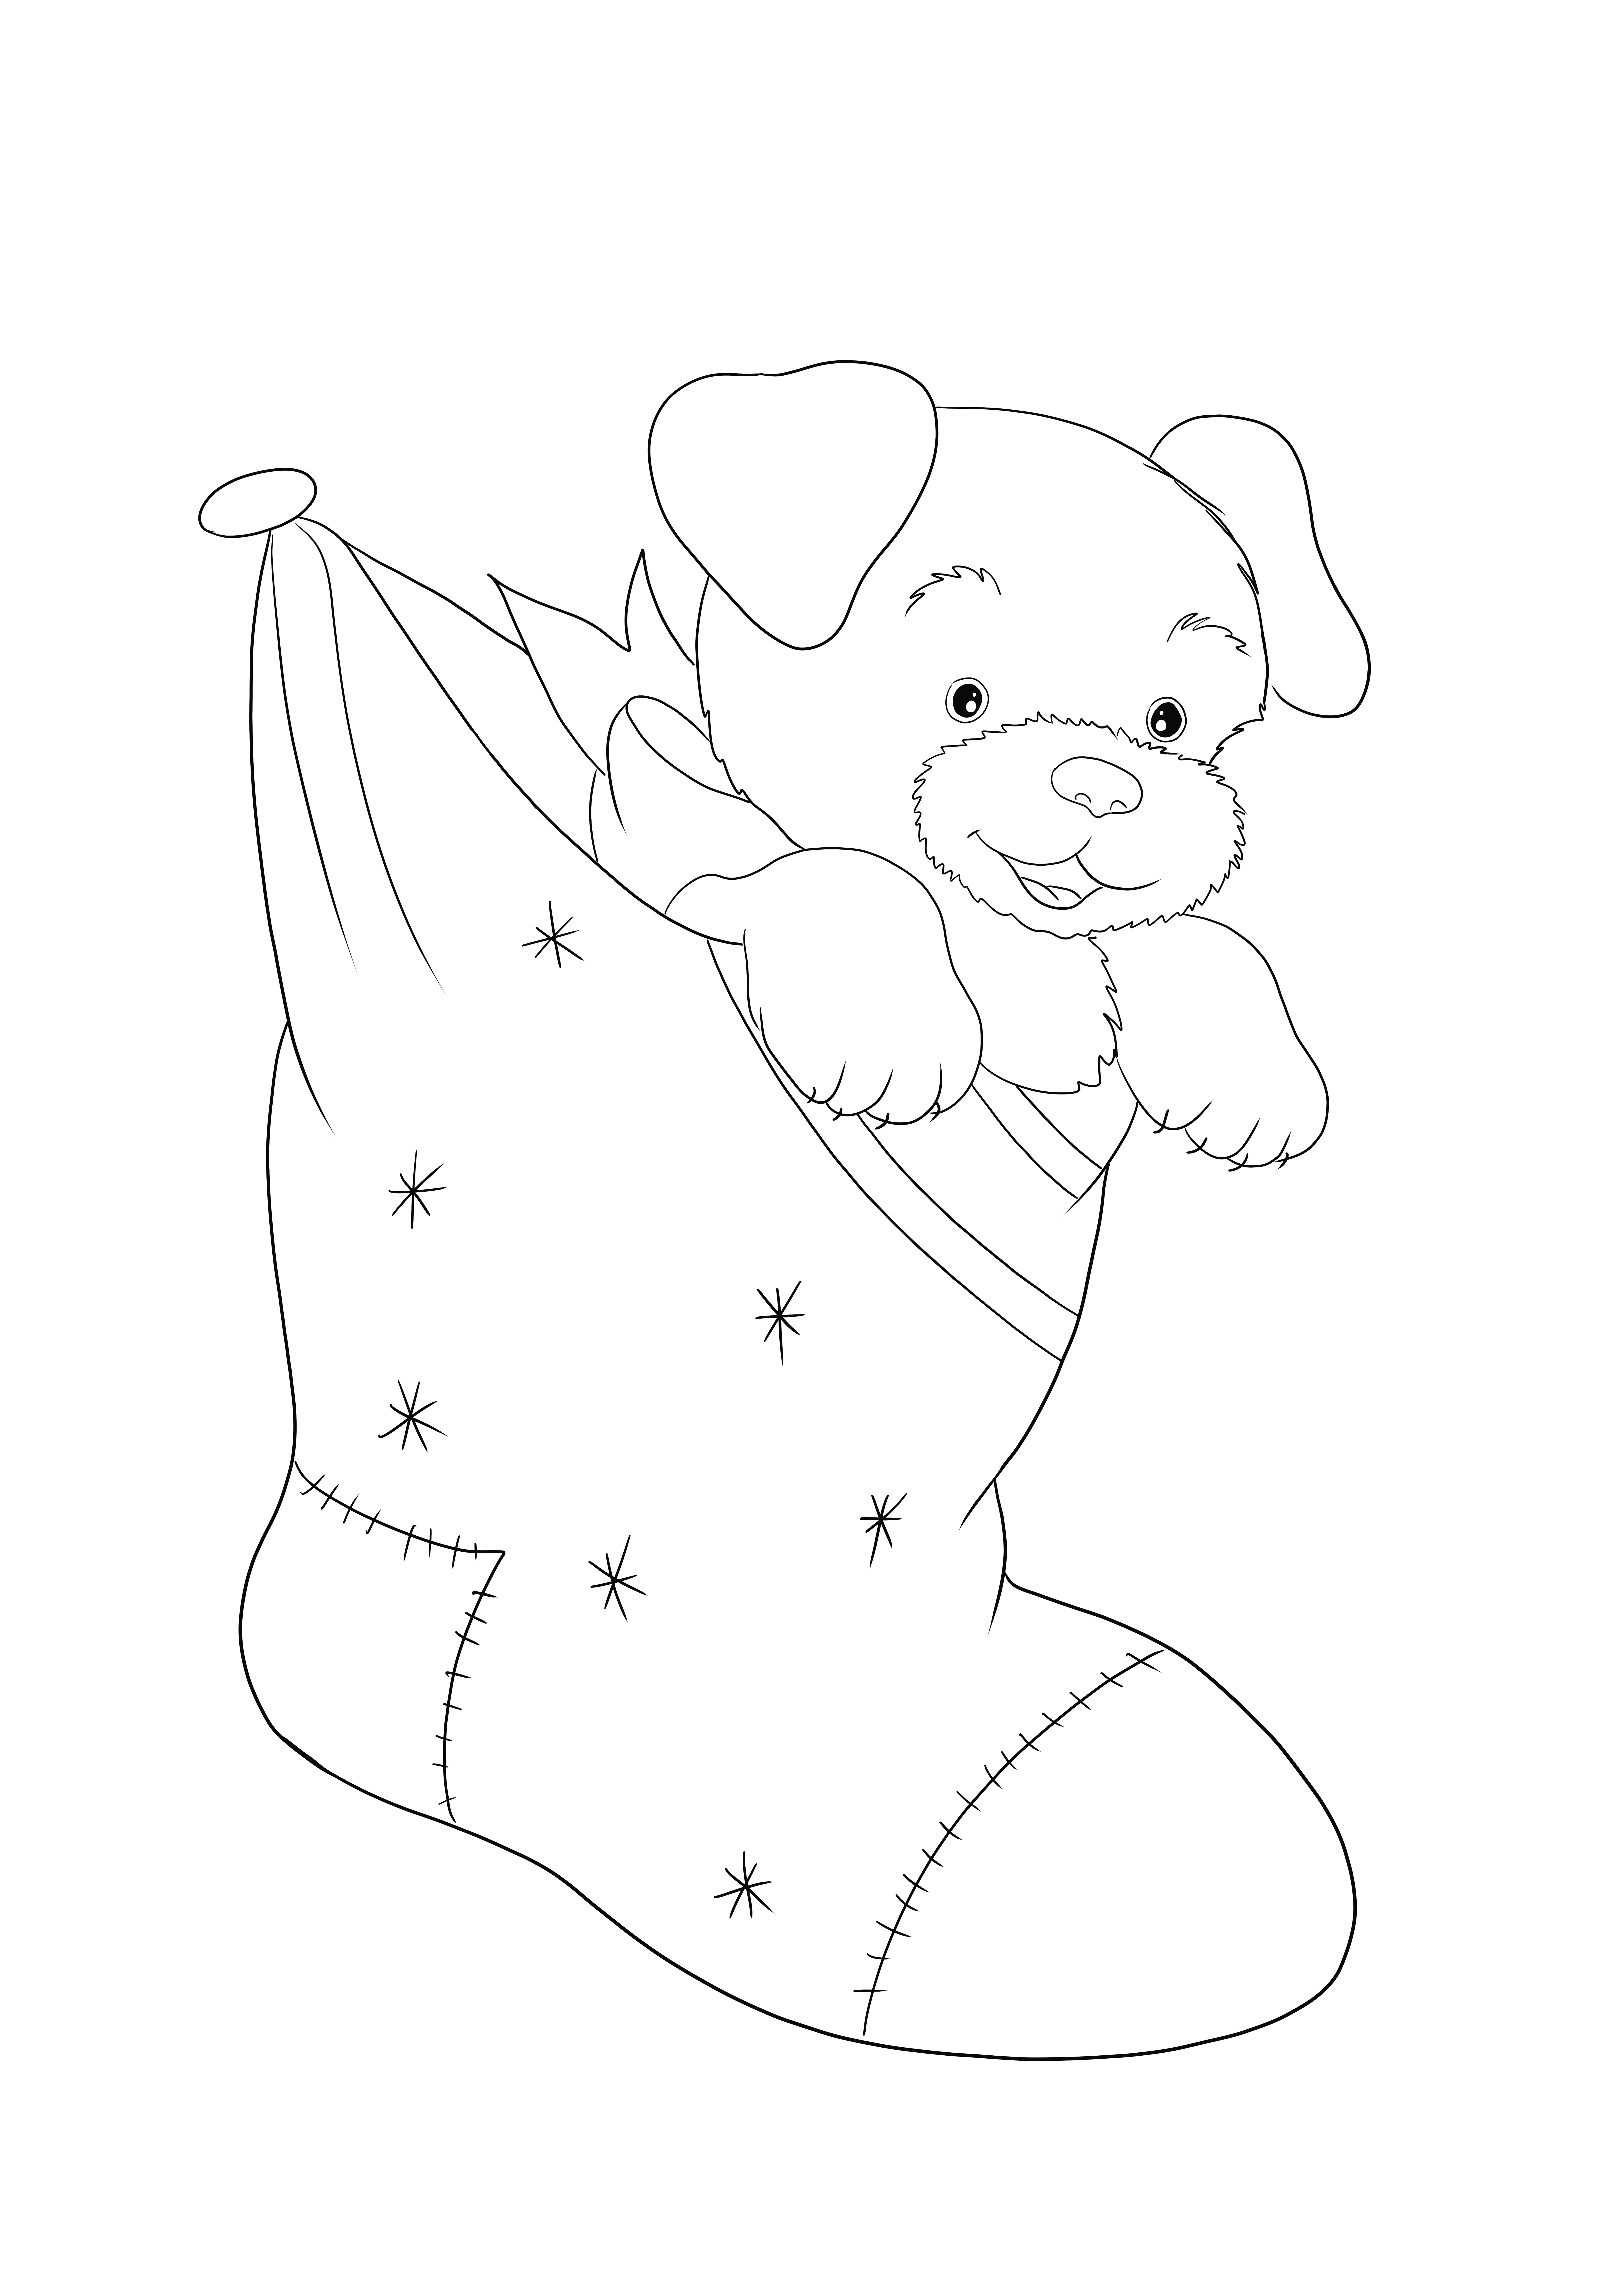 A puppy Dog in a Christmas Stocking free printable for coloring